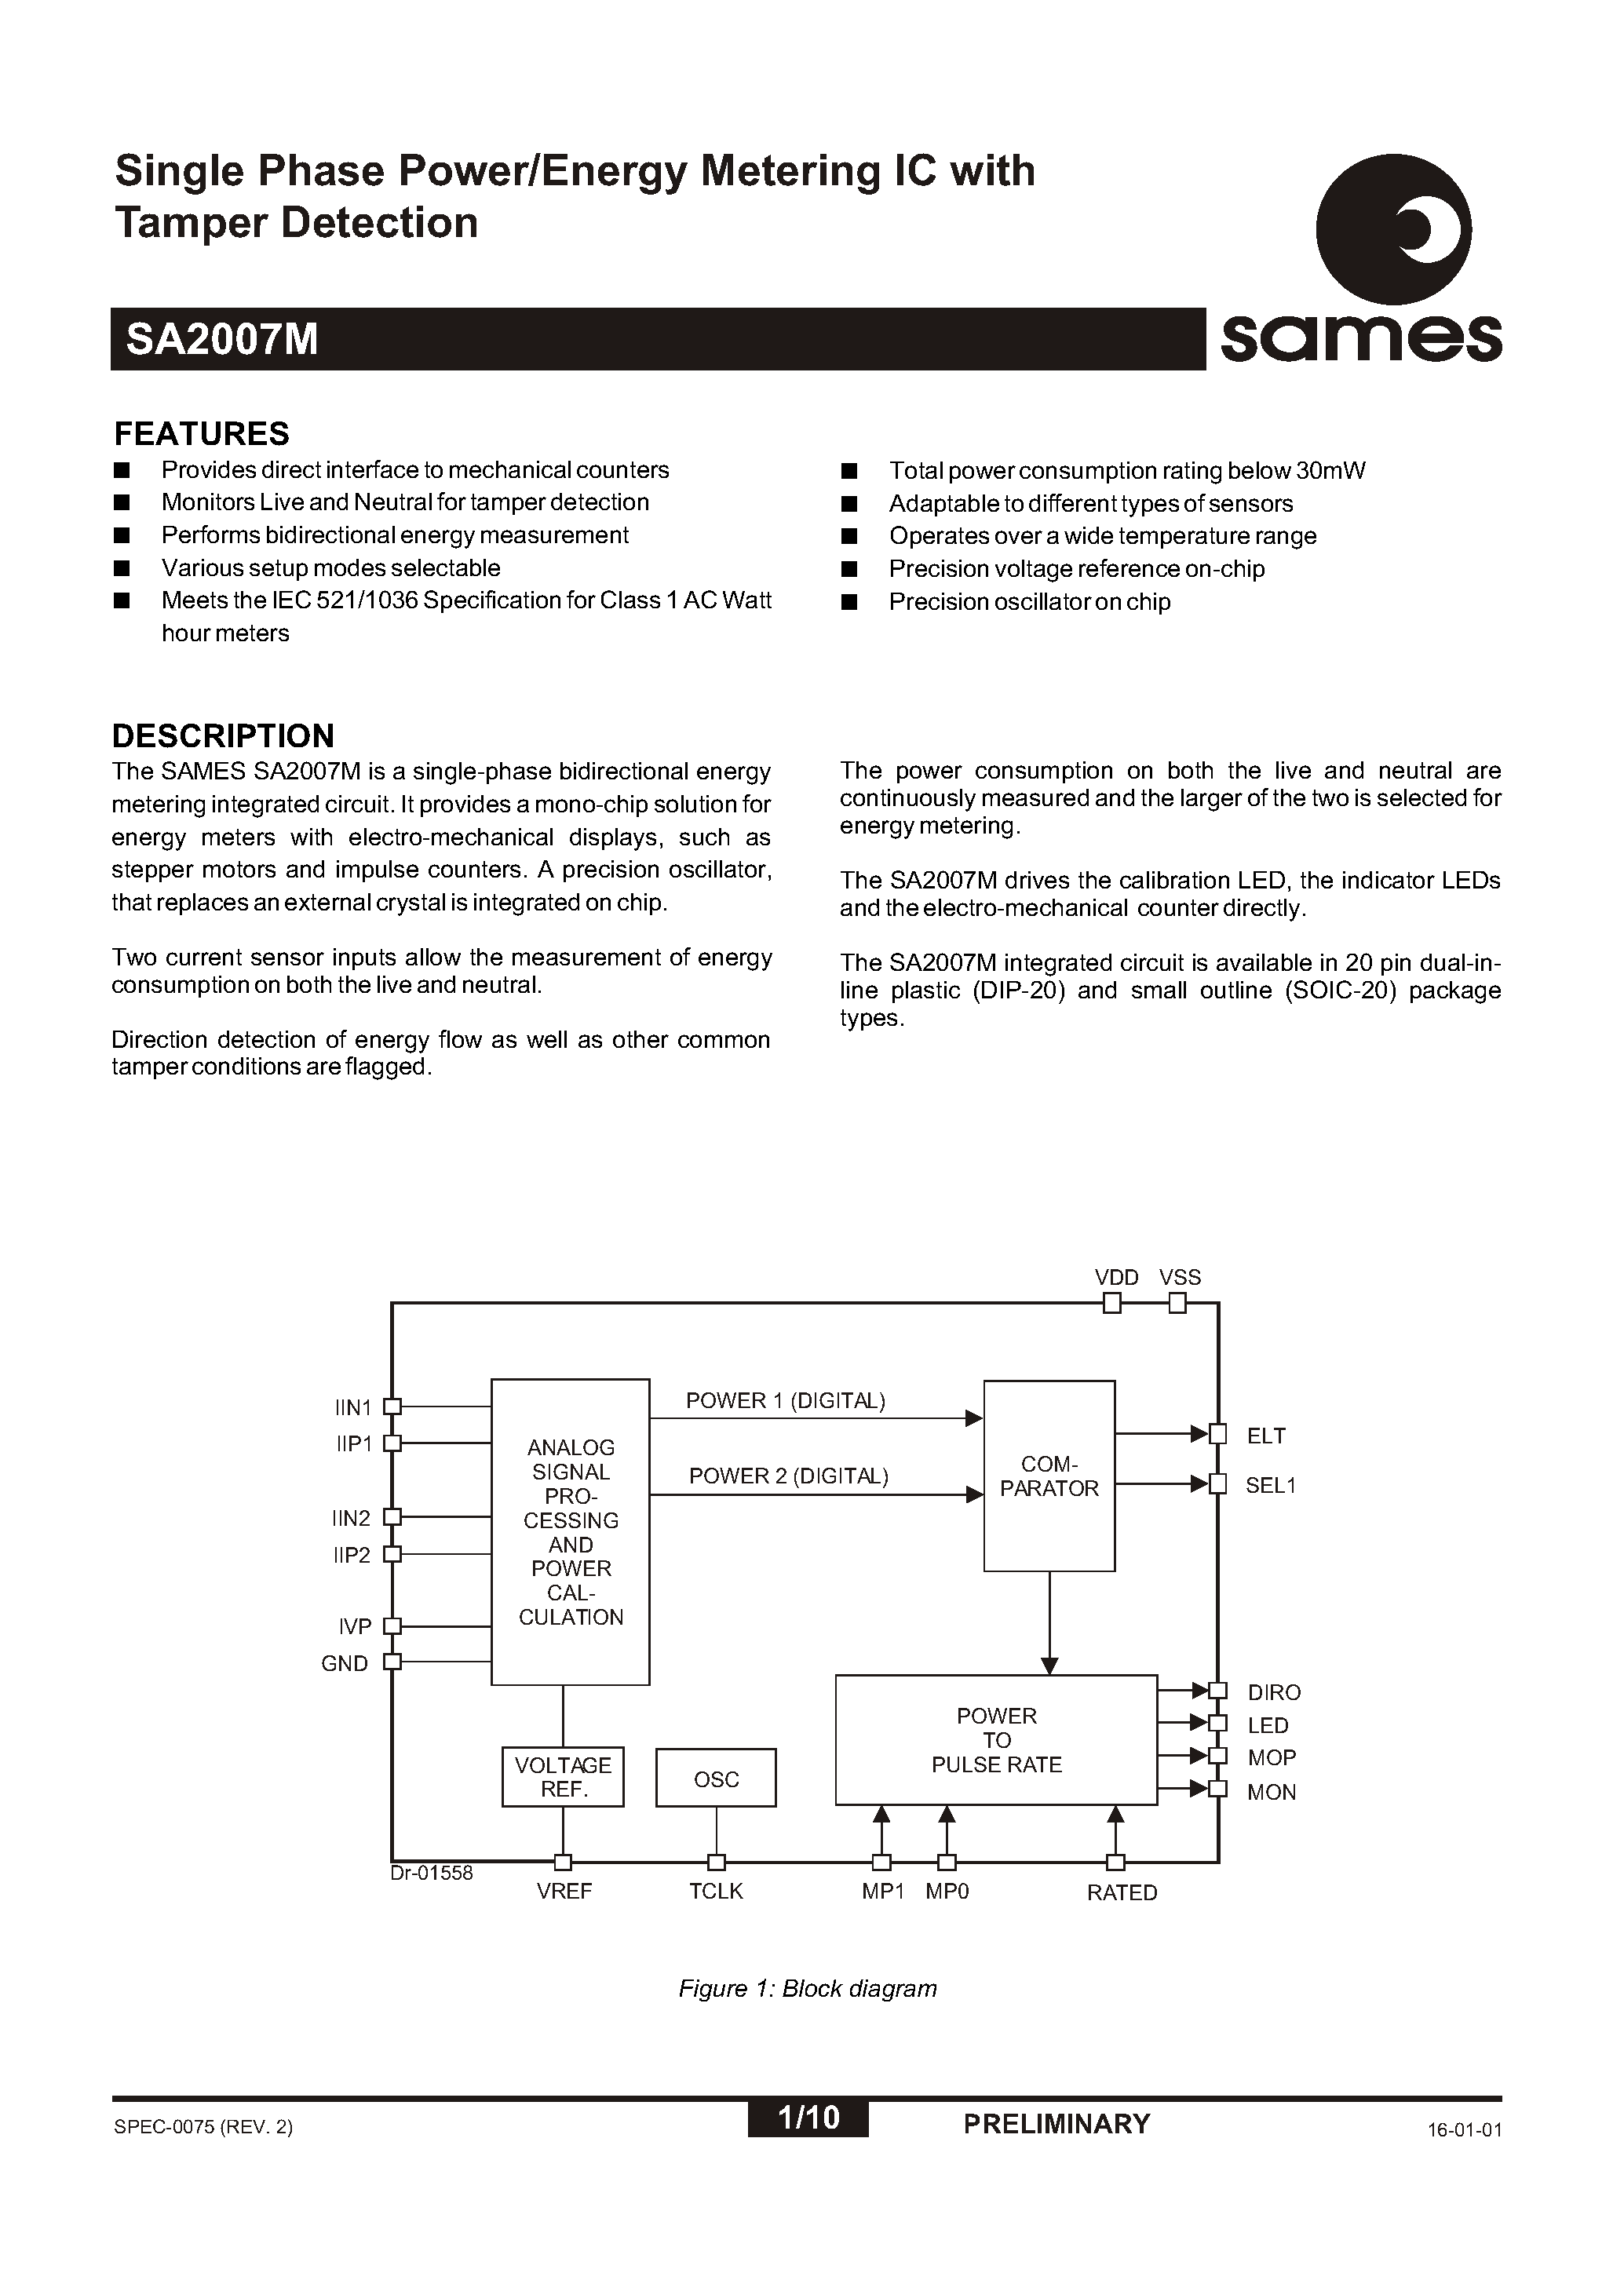 Datasheet SA2007M - Single Phase Power/Energy Metering IC with Tamper Detection page 1